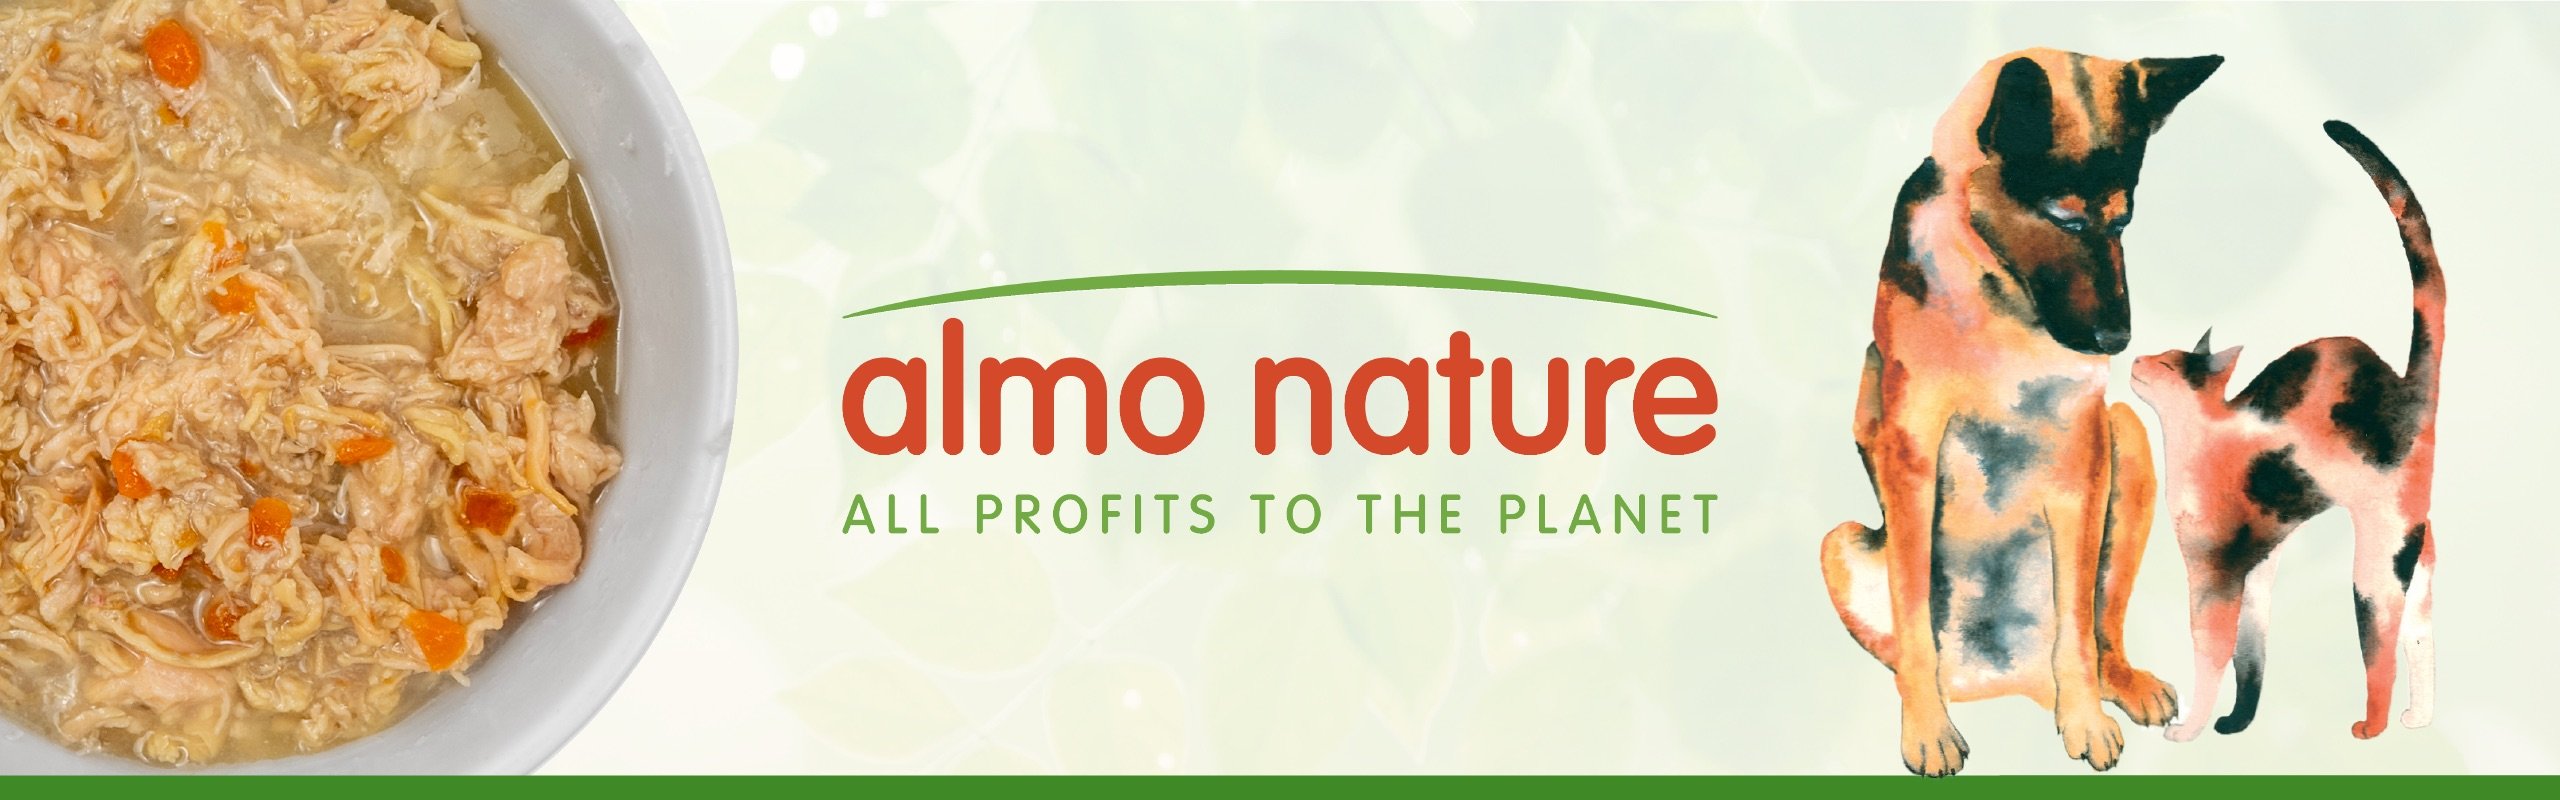 Almo nature - all profits to the planet